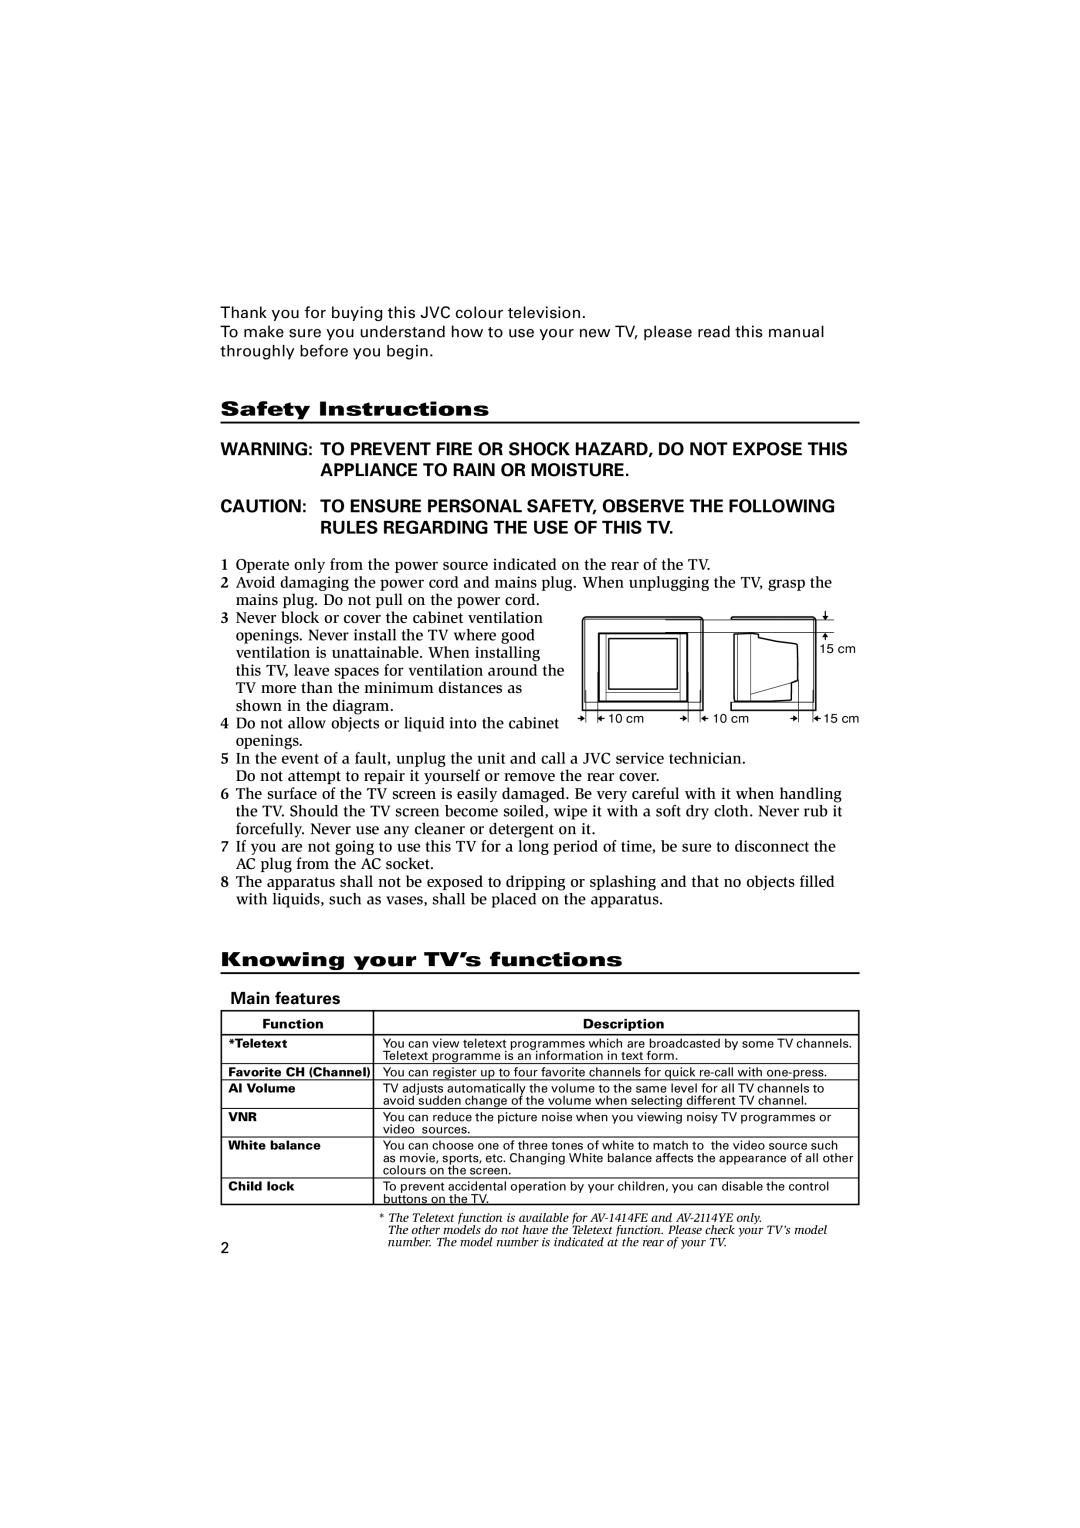 JVC specifications Safety Instructions, Knowing your TV’s functions, Main features 